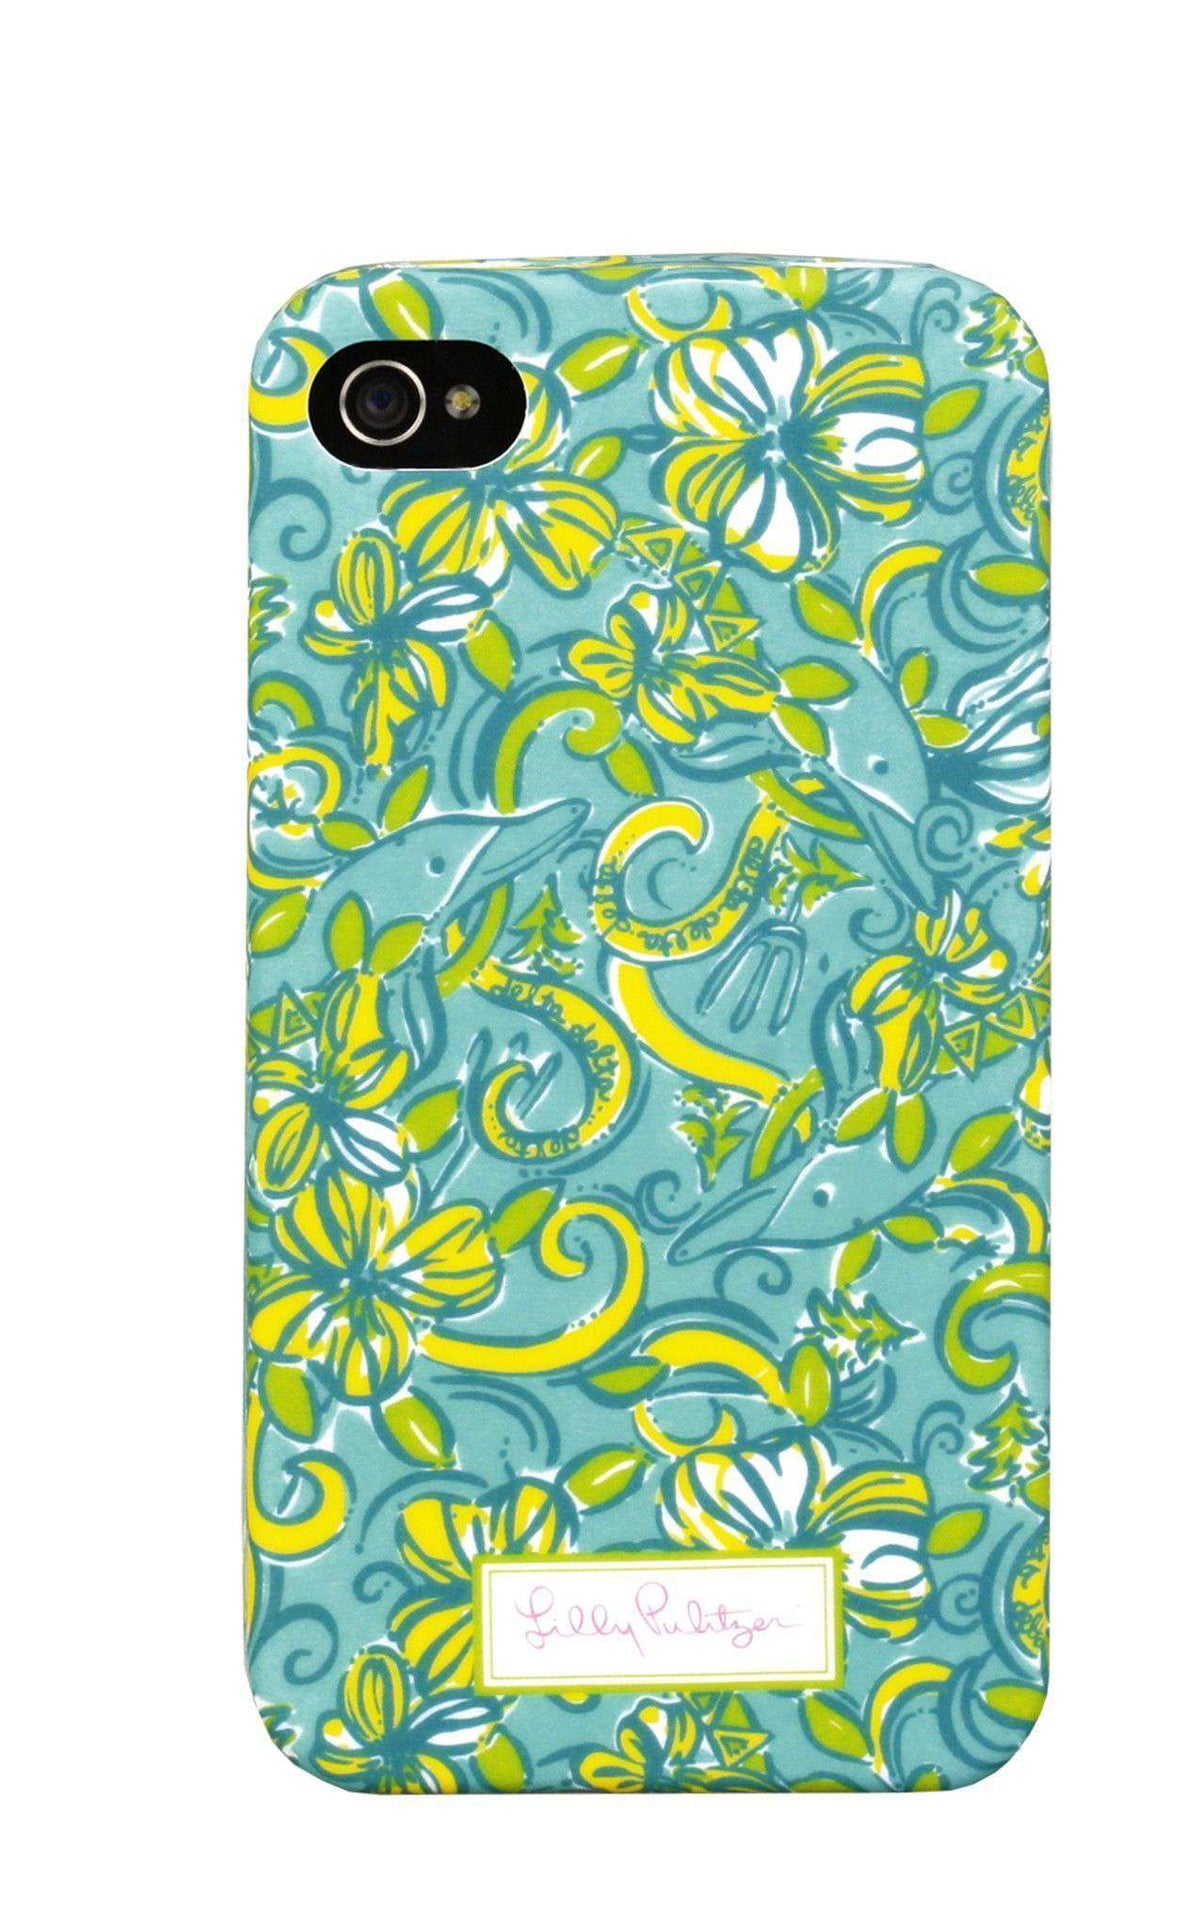 Delta Delta Delta iPhone 4/4s Cover by Lilly Pulitzer - Country Club Prep